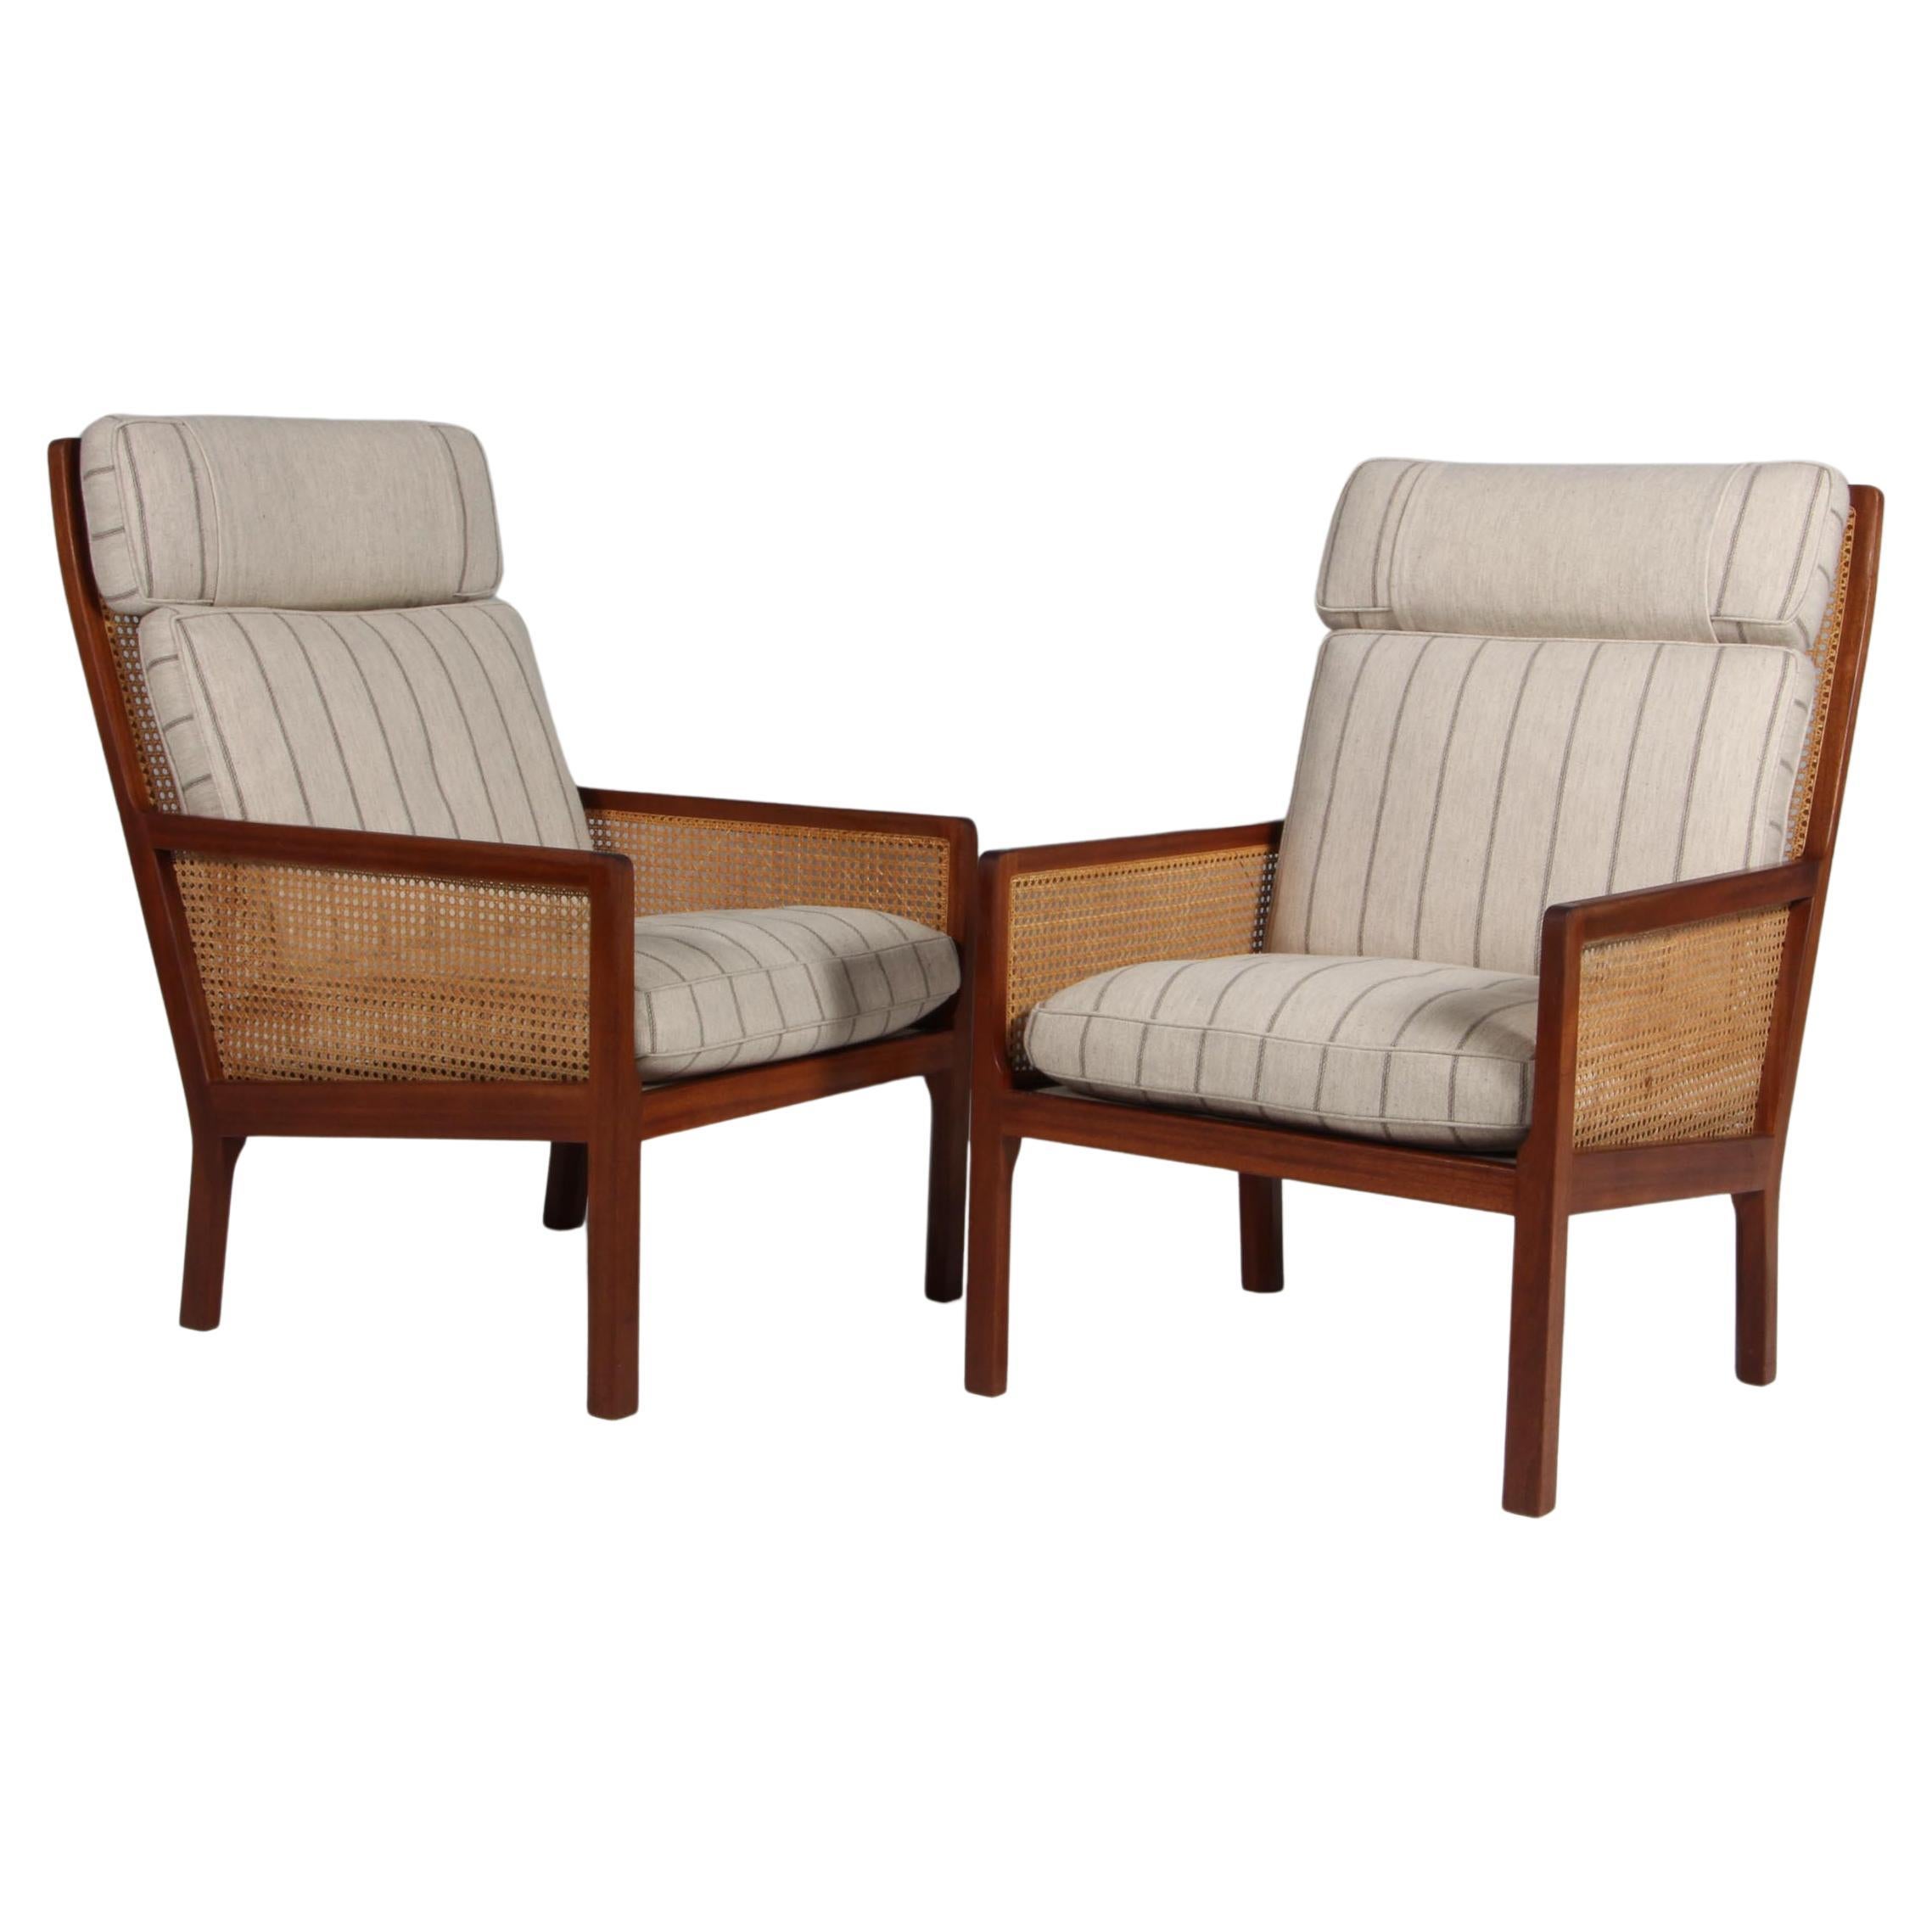 Bernt Pedersen lounge chair, mahogany and Cane For Sale